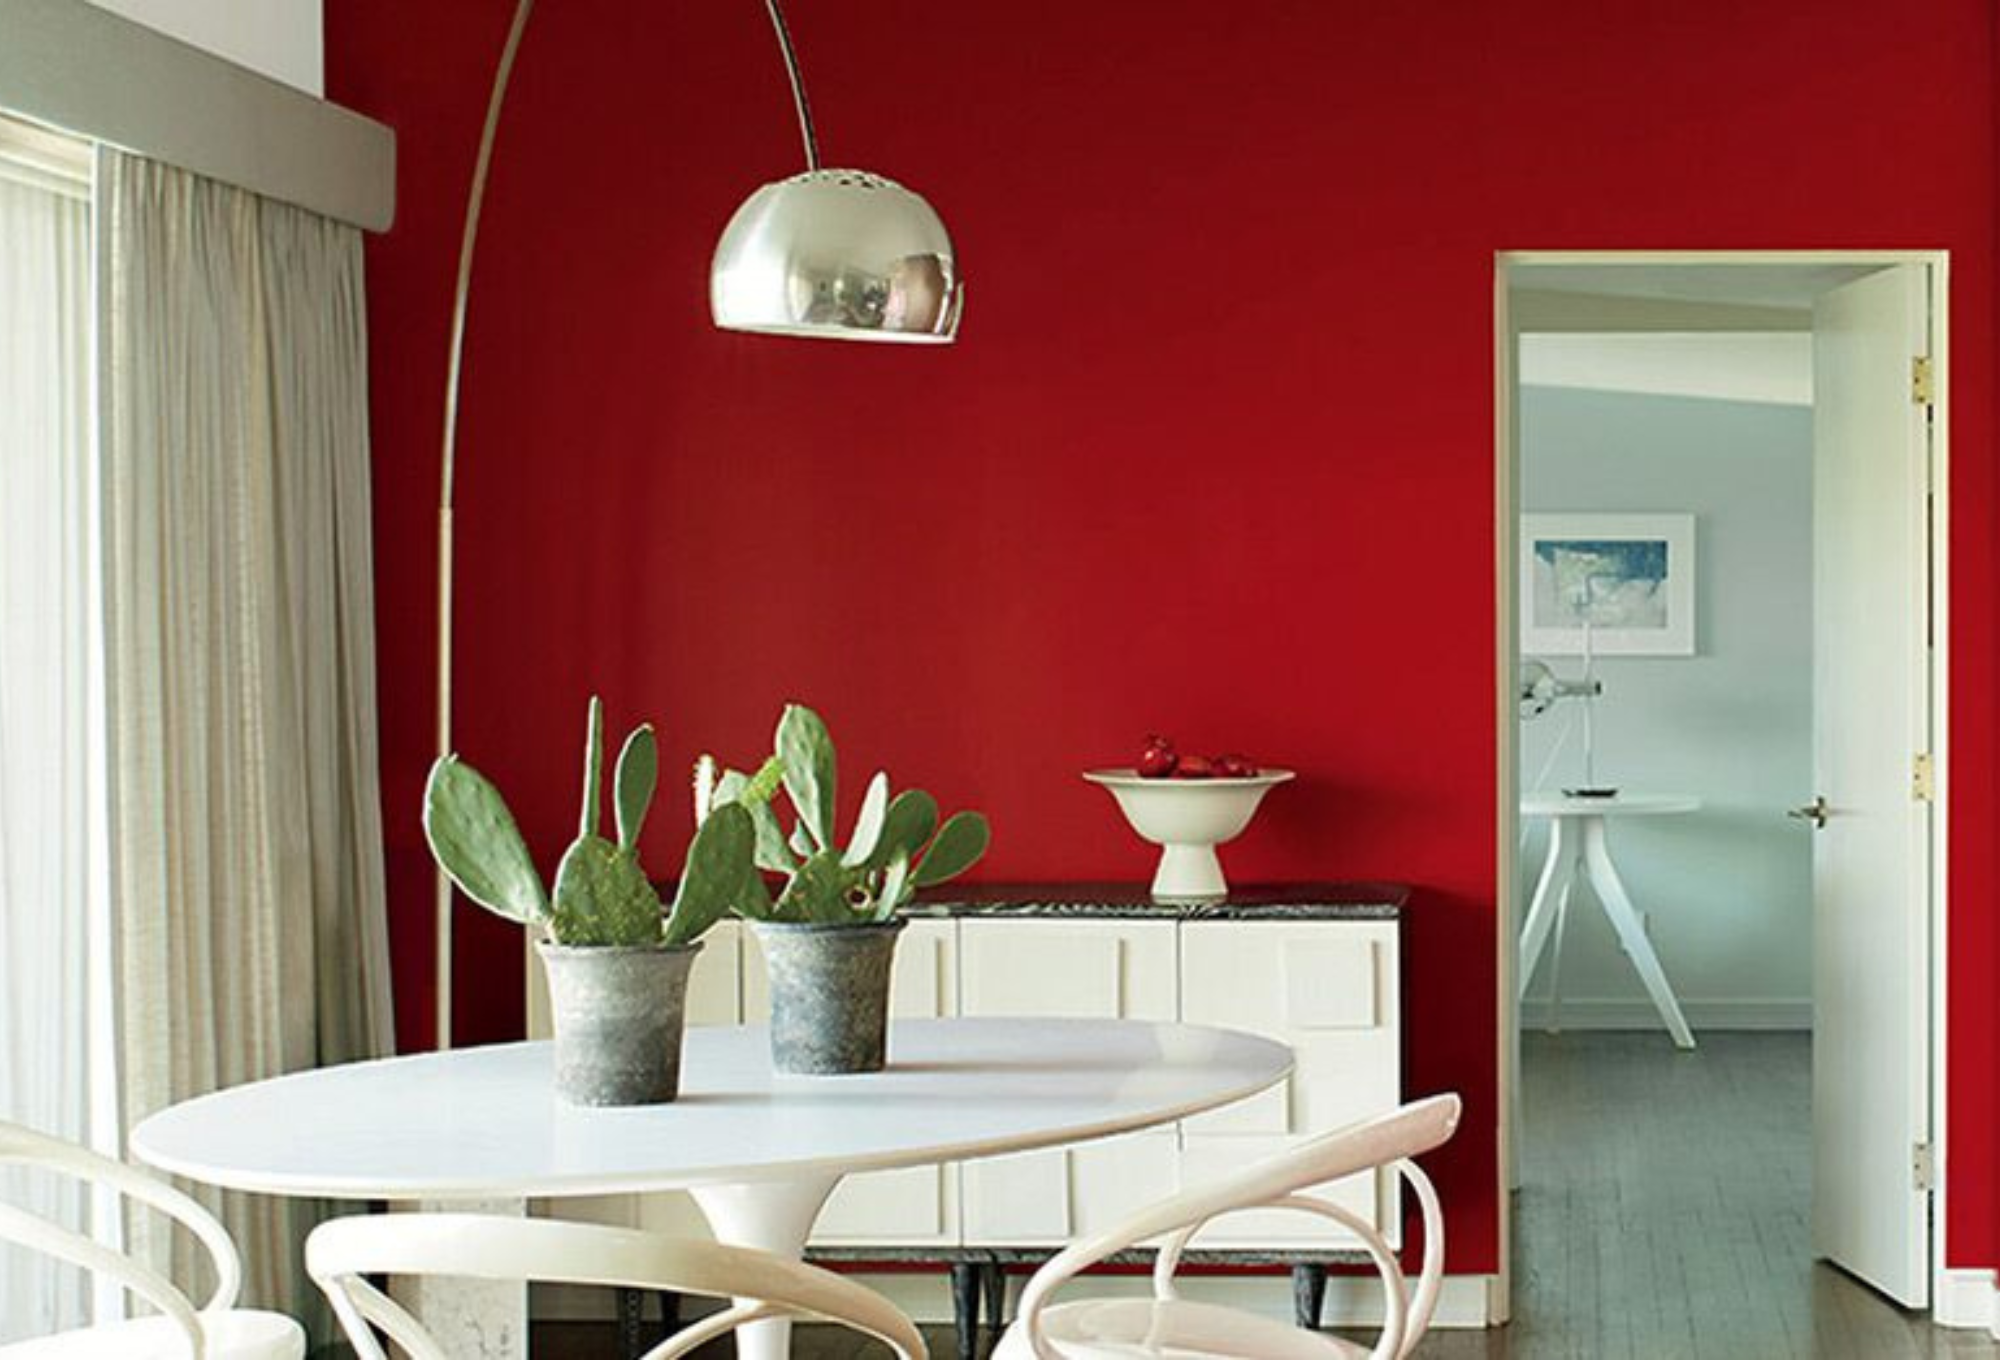 Benjamin Moore Interior Paint available at JC Licht